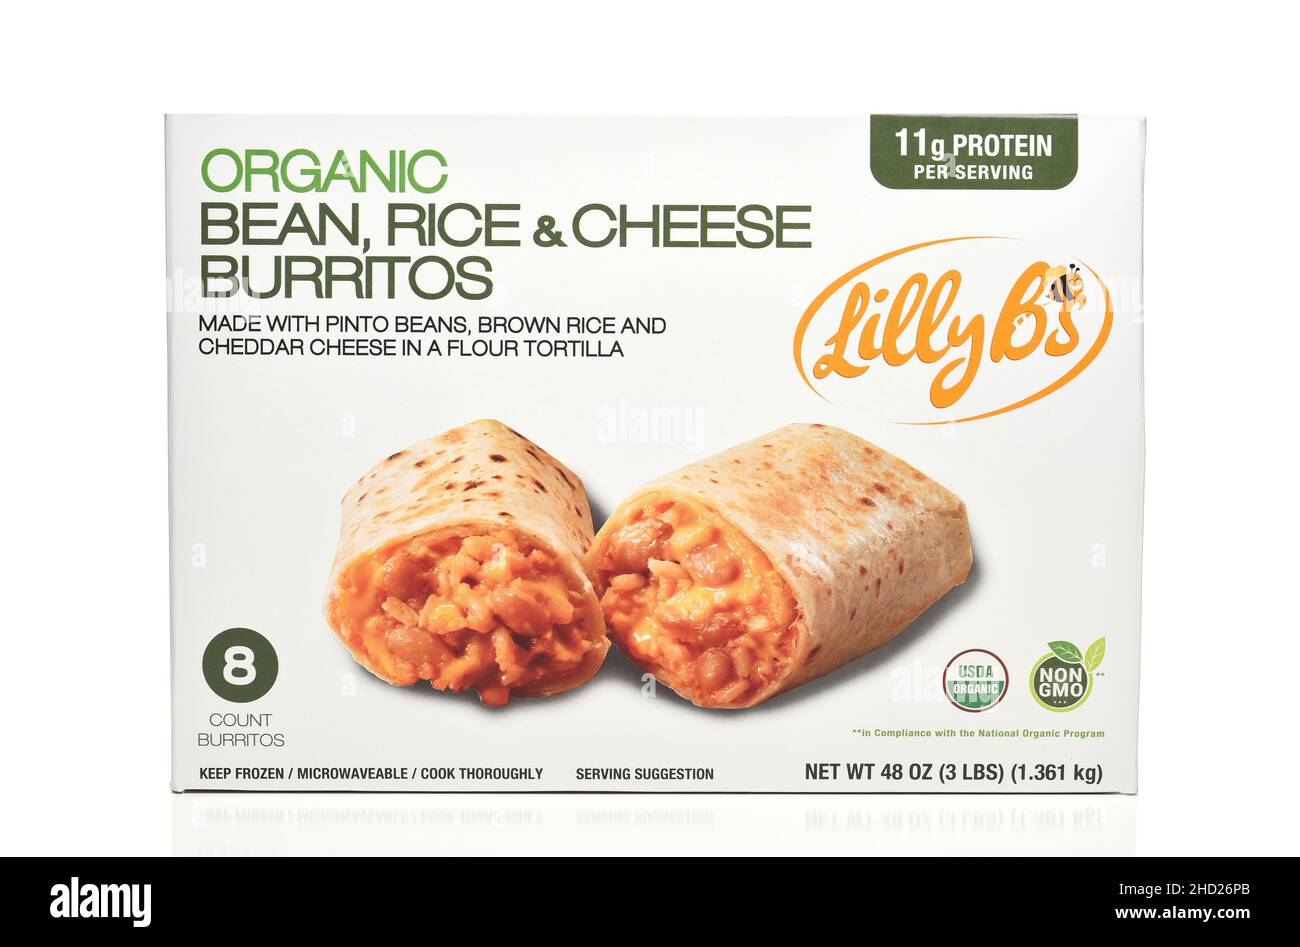 IRVINE, CALIFORNIA - 1 JAN 2022: An 8 count package of Lilly B's Frozen Organic Bean, Rice and Cheese Burritos. Stock Photo